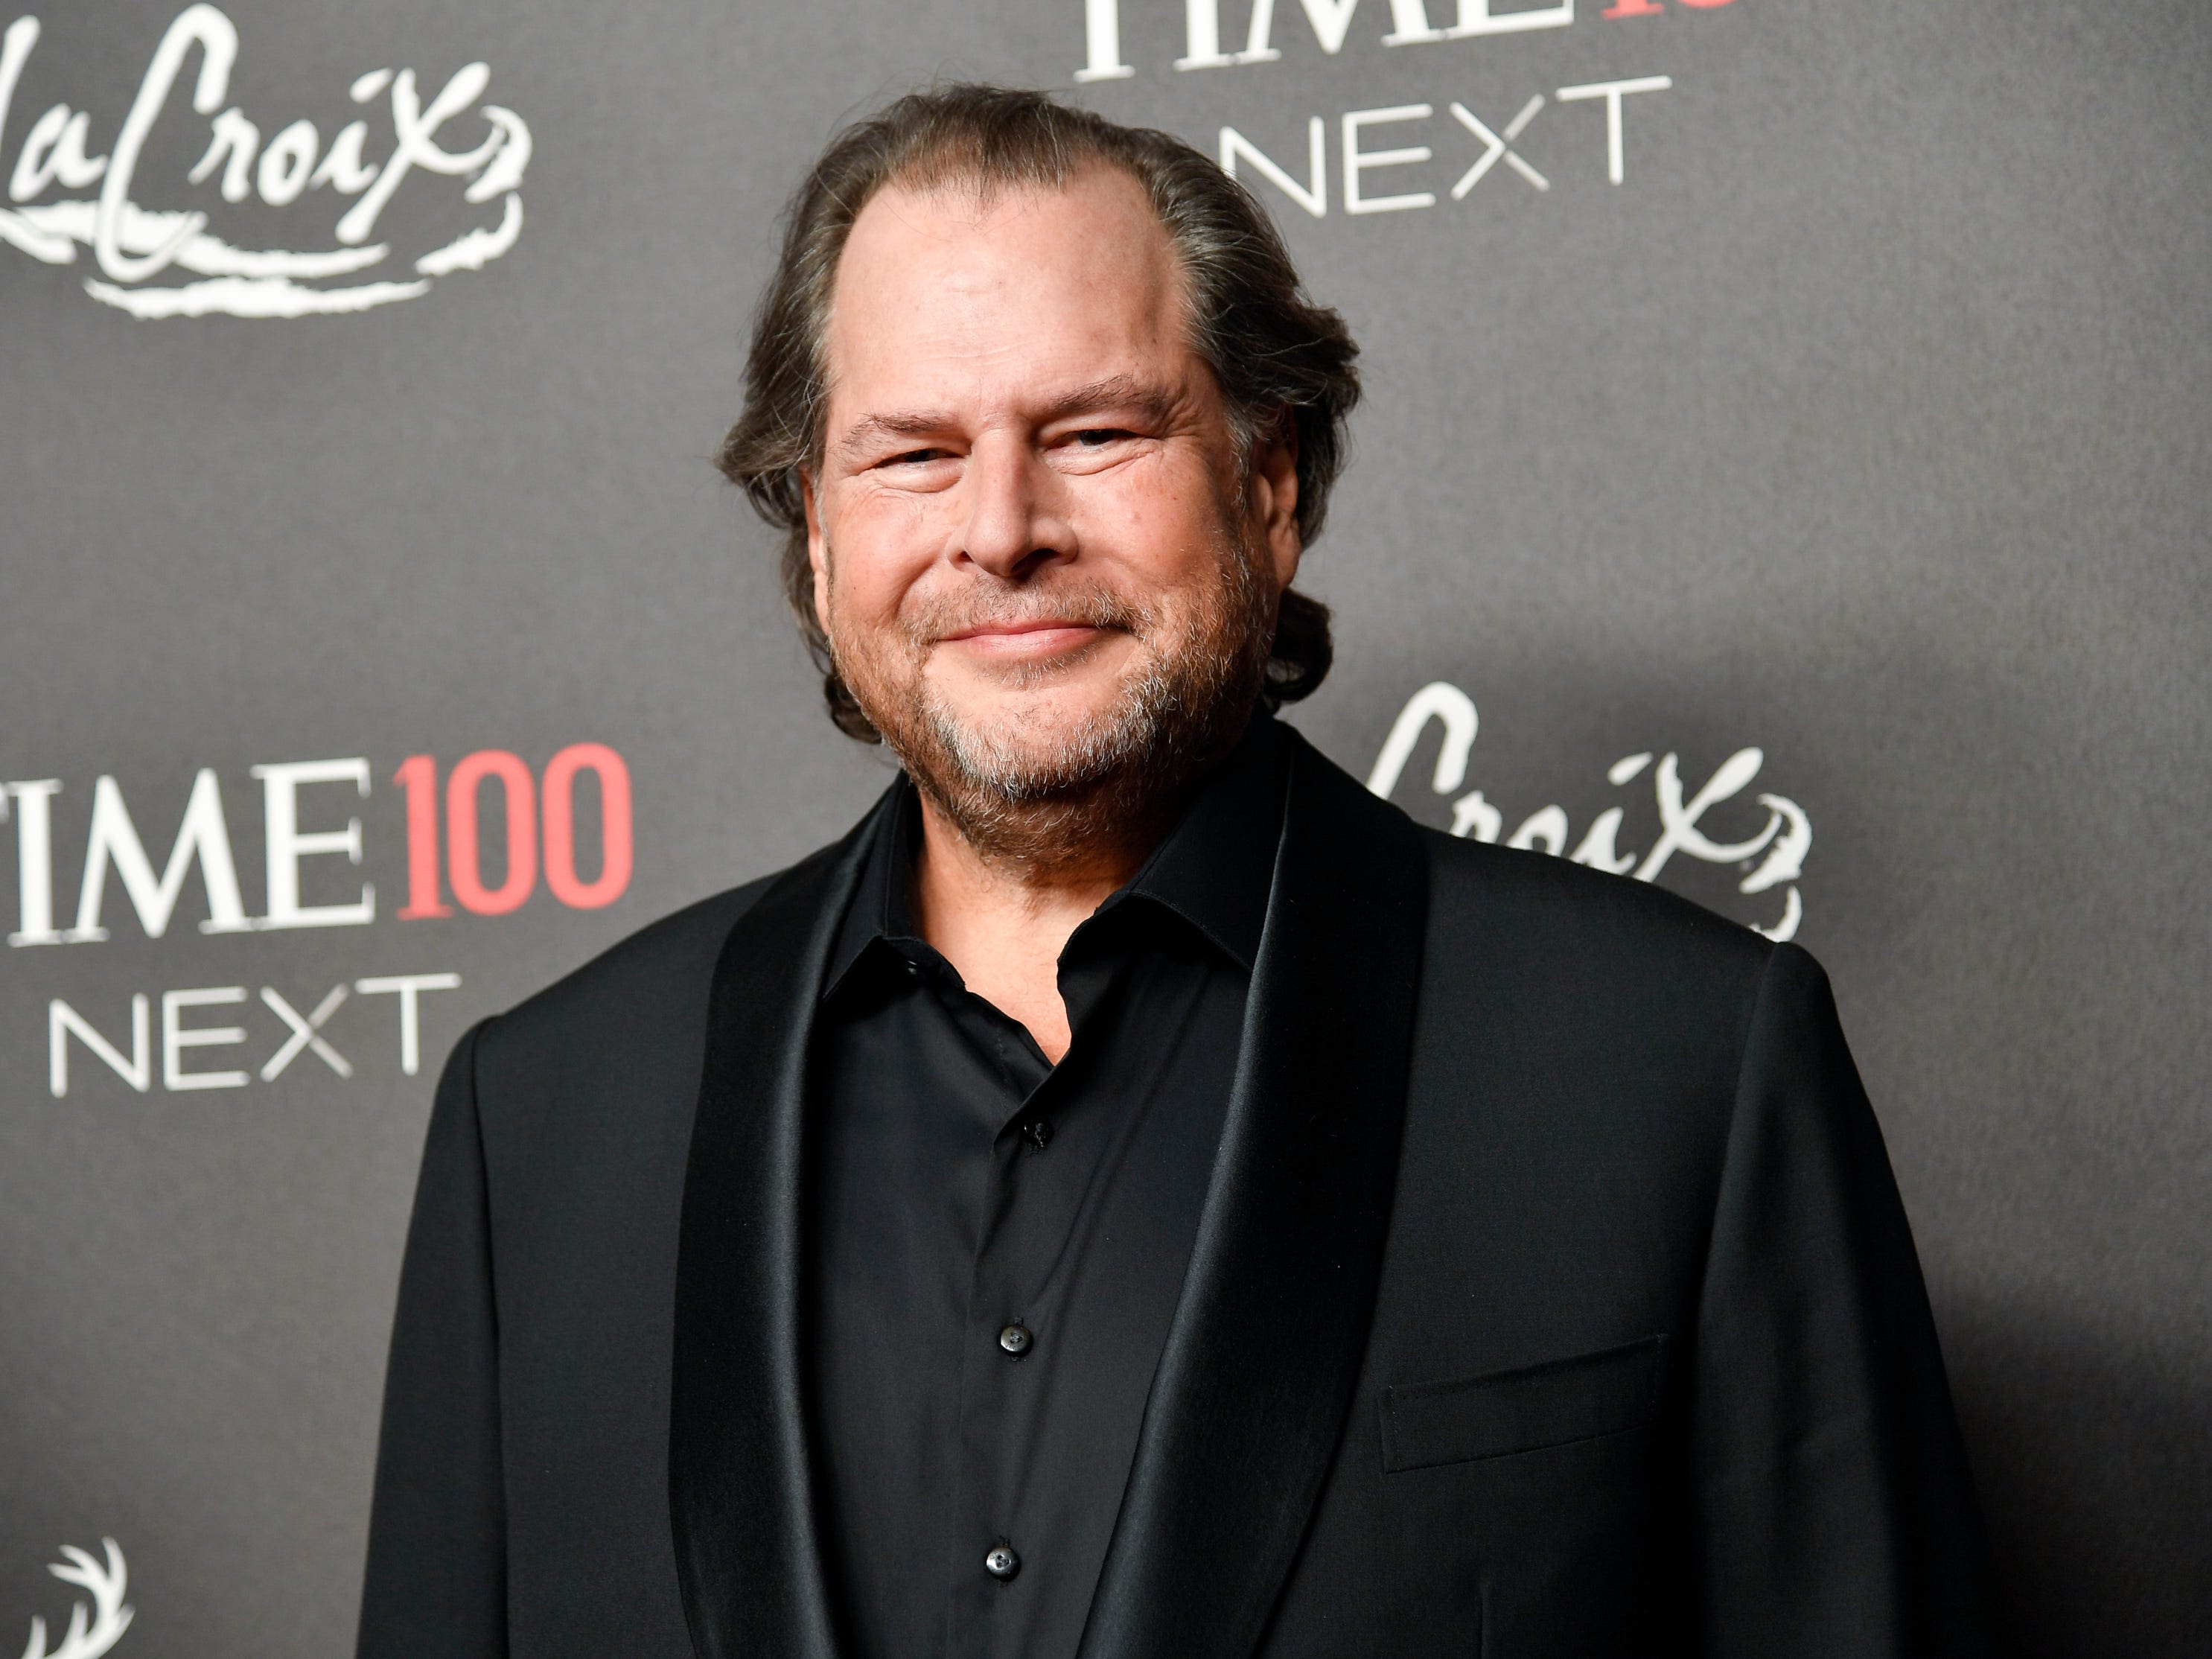 The rise of Marc Benioff, the CEO of Salesforce and owner of Time Magazine